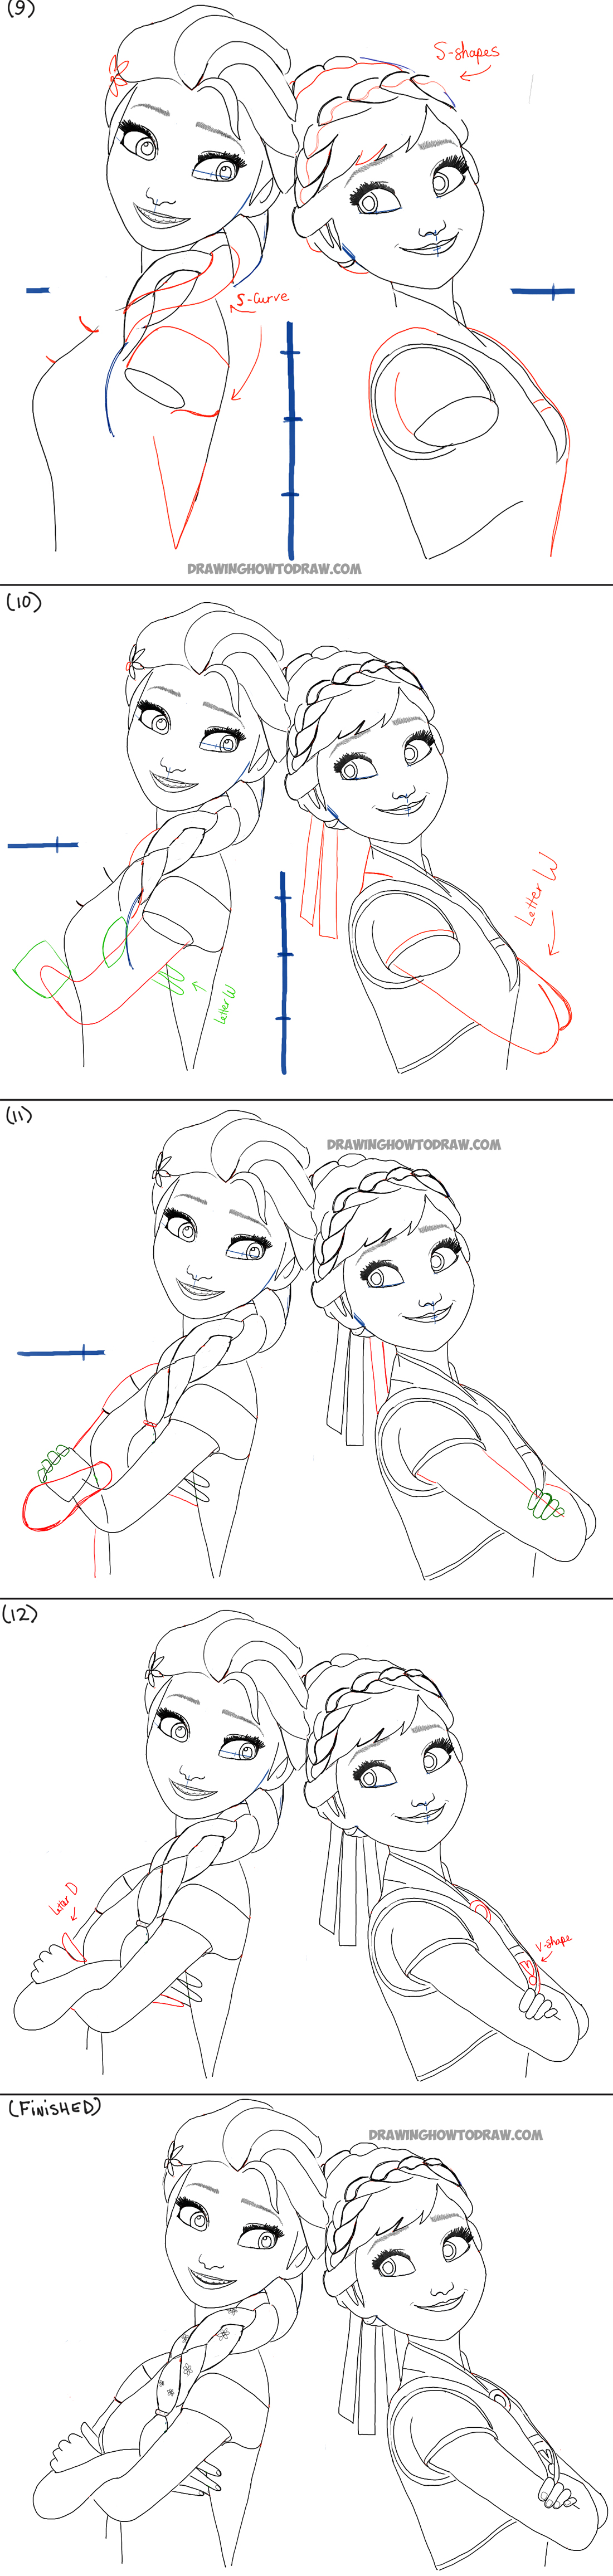 How to Draw Anna and Elsa from Disney's Frozen Fever with Easy Steps ...